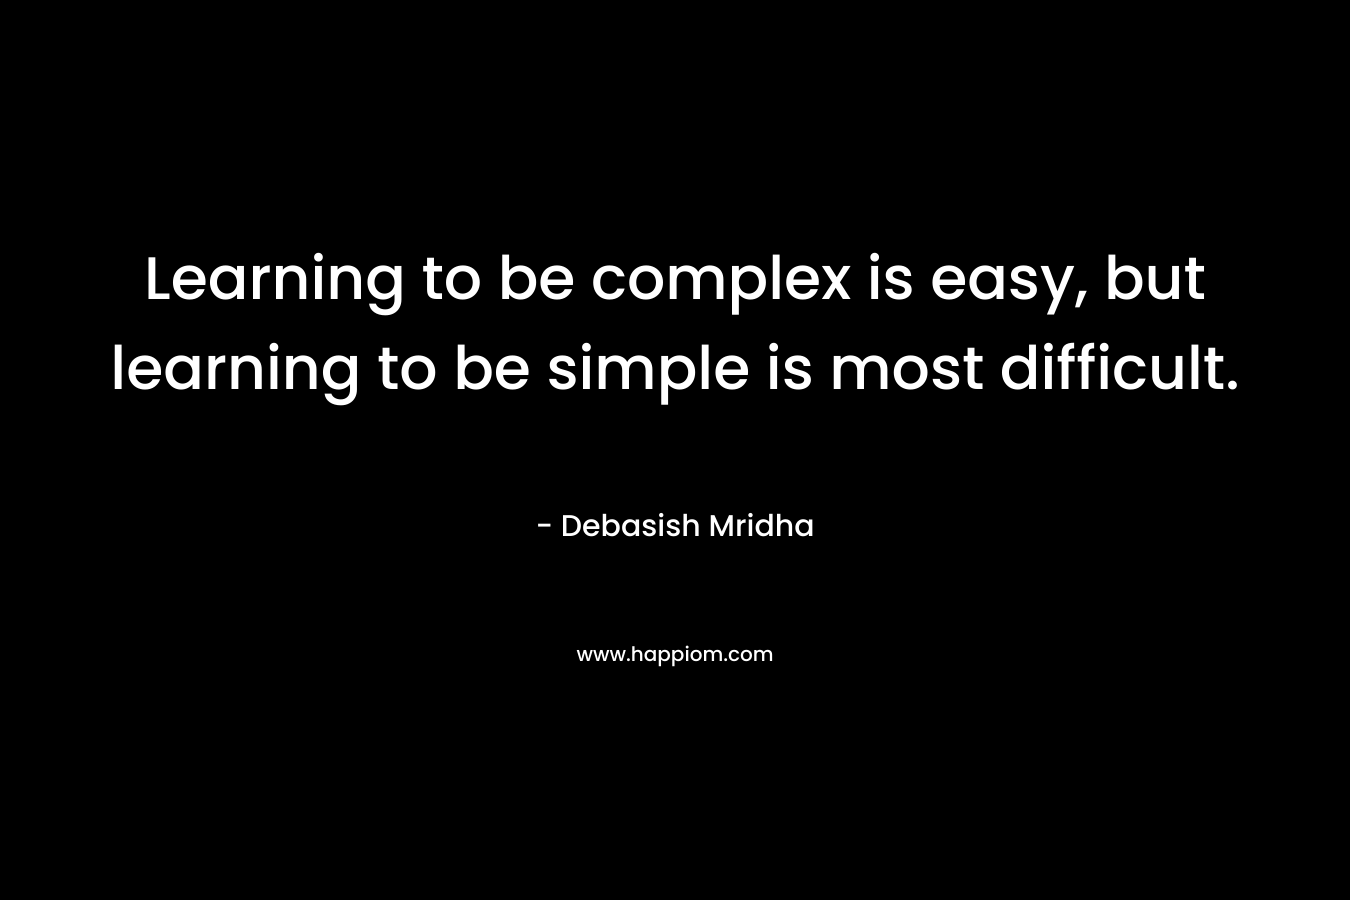 Learning to be complex is easy, but learning to be simple is most difficult.